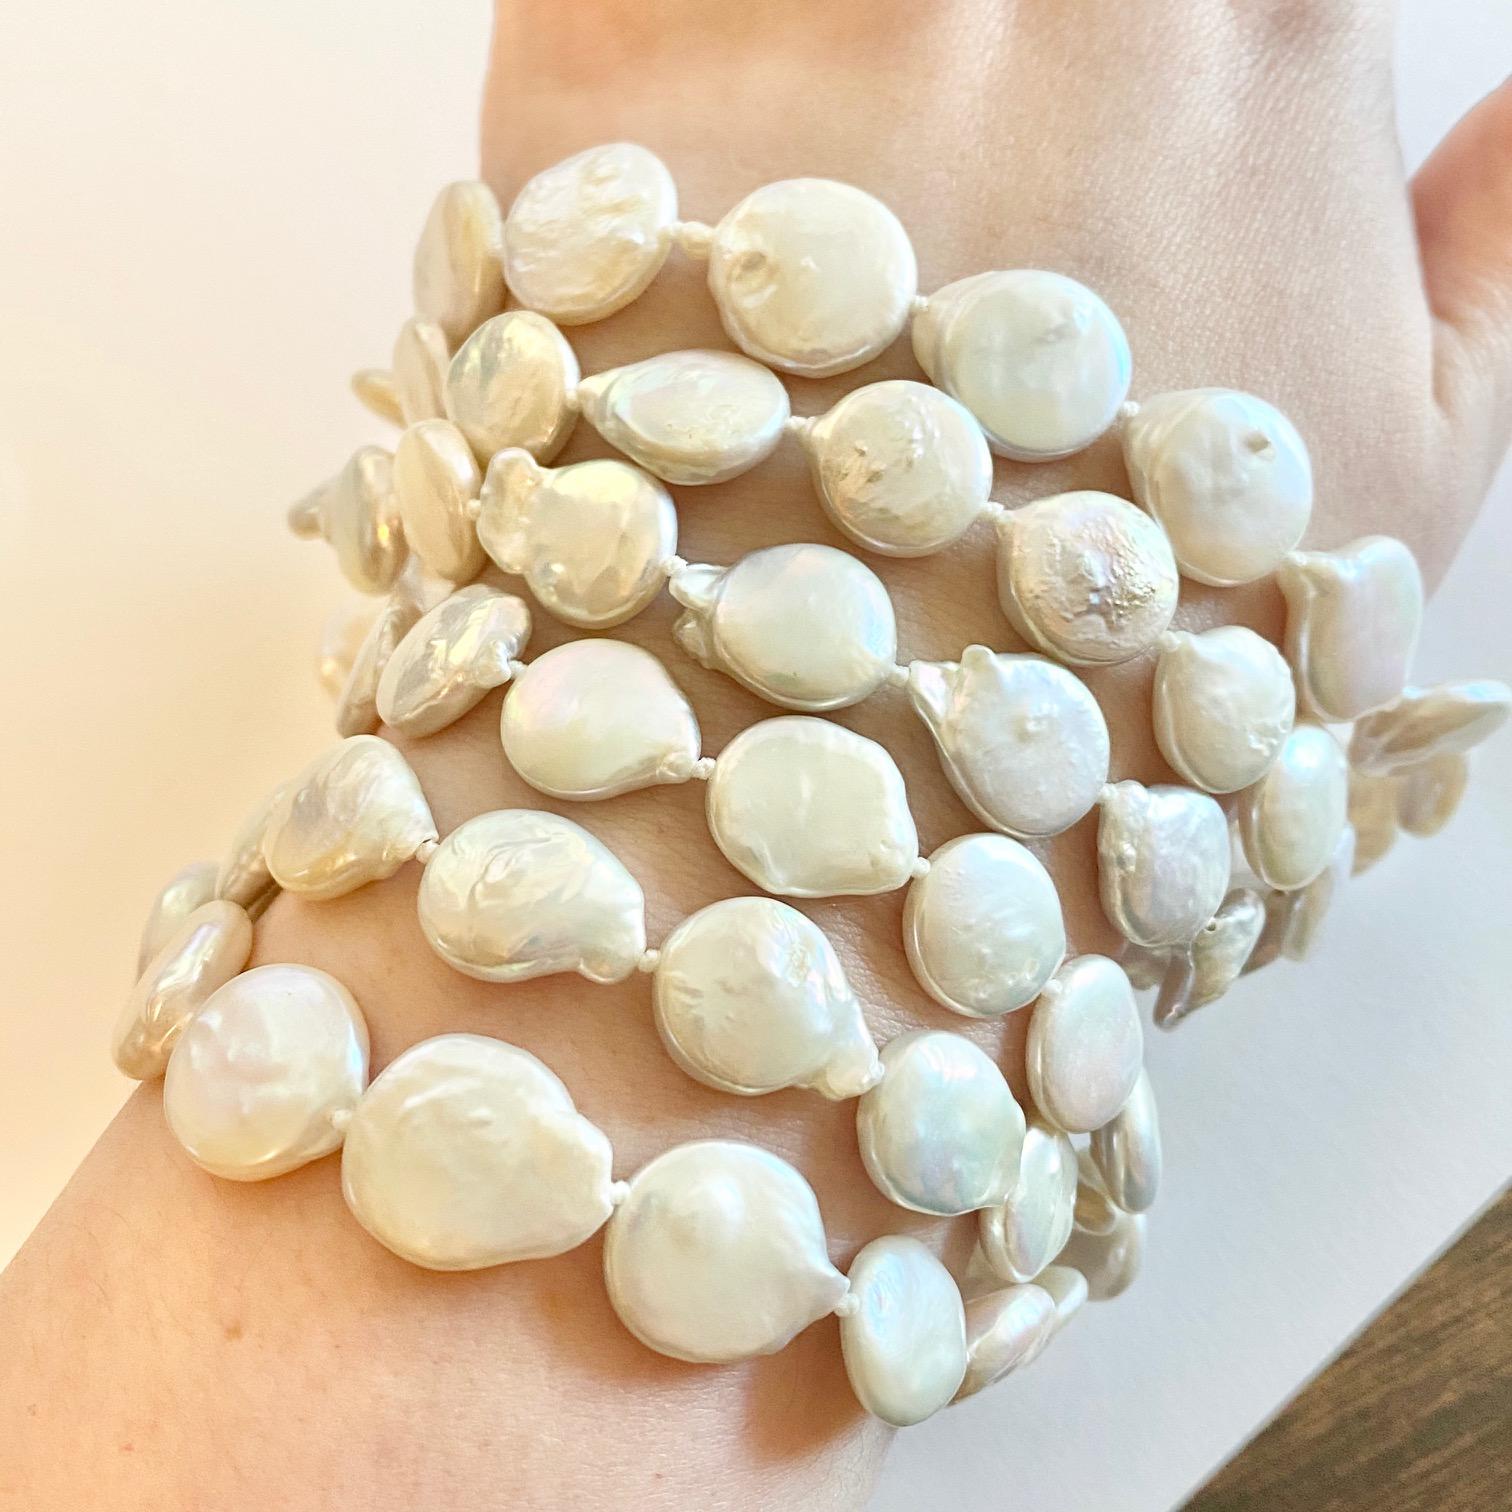 This necklace is a classic!! Pearls are always in style and represent tons of class and style and these cultured pearls have incredible luster! These are genuine coin pearls that have a gorgeous cool toned off white hue to them. These pearls have a